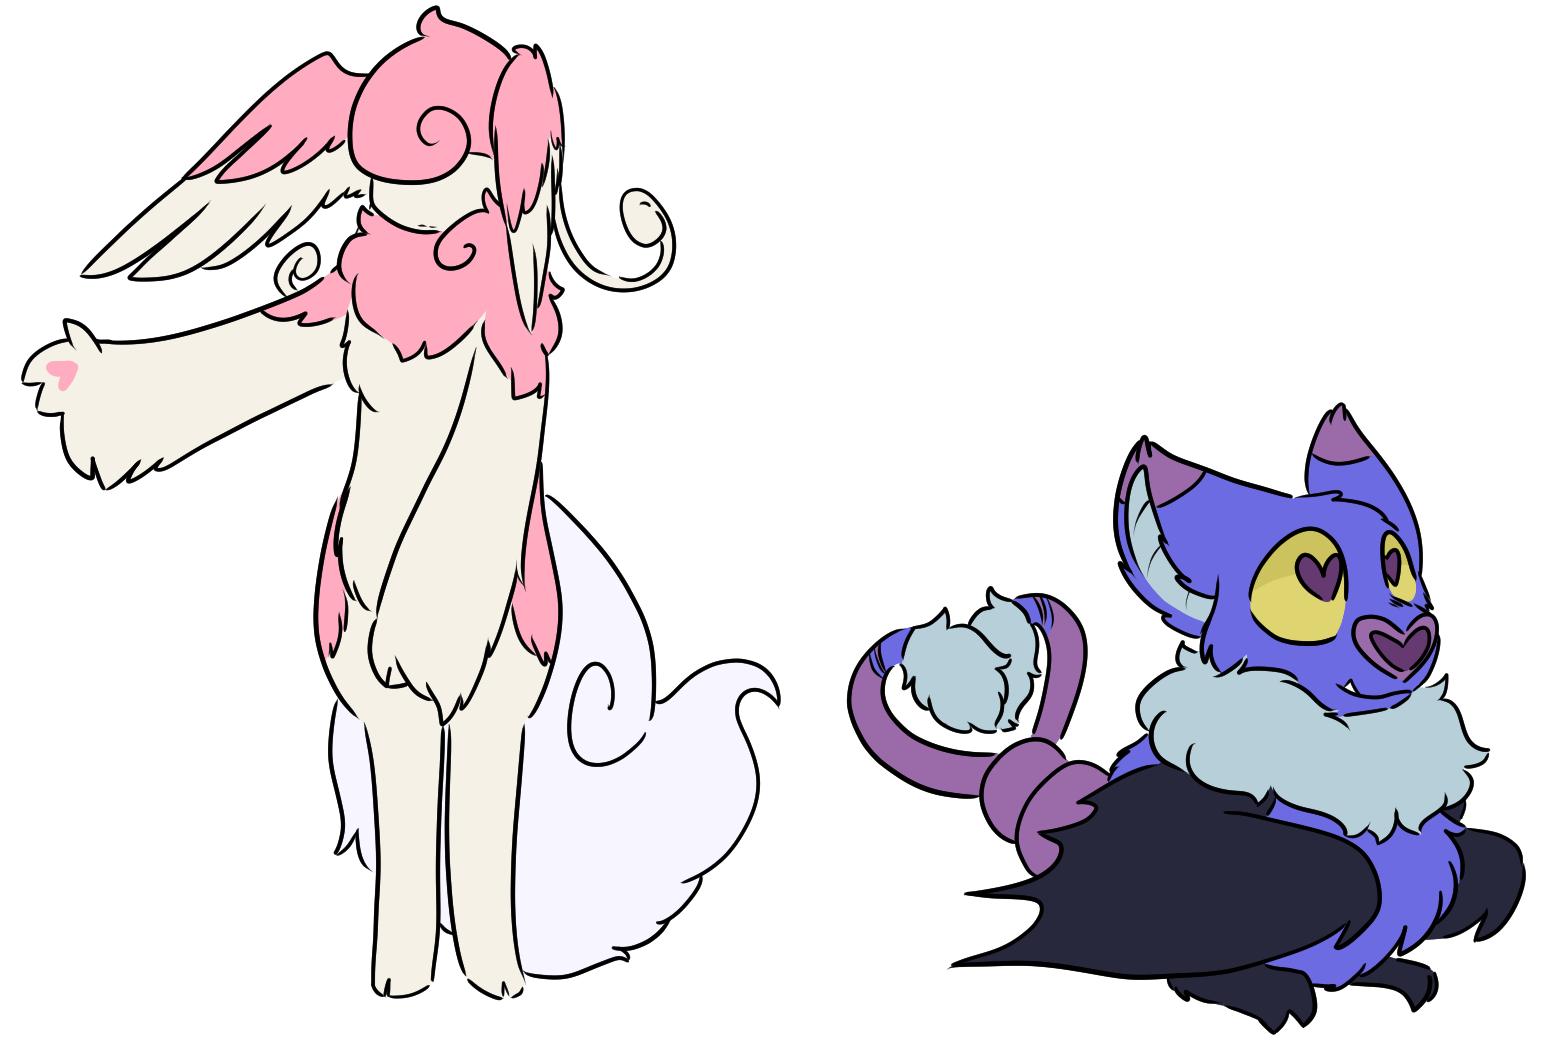 An Audino and a Swoobat, side by side. The Audino's eyes are covered, and it is rather fluffy, while the Swoobat's pupils are replaced by hearts and its tails have tufts similar to a Purugly.